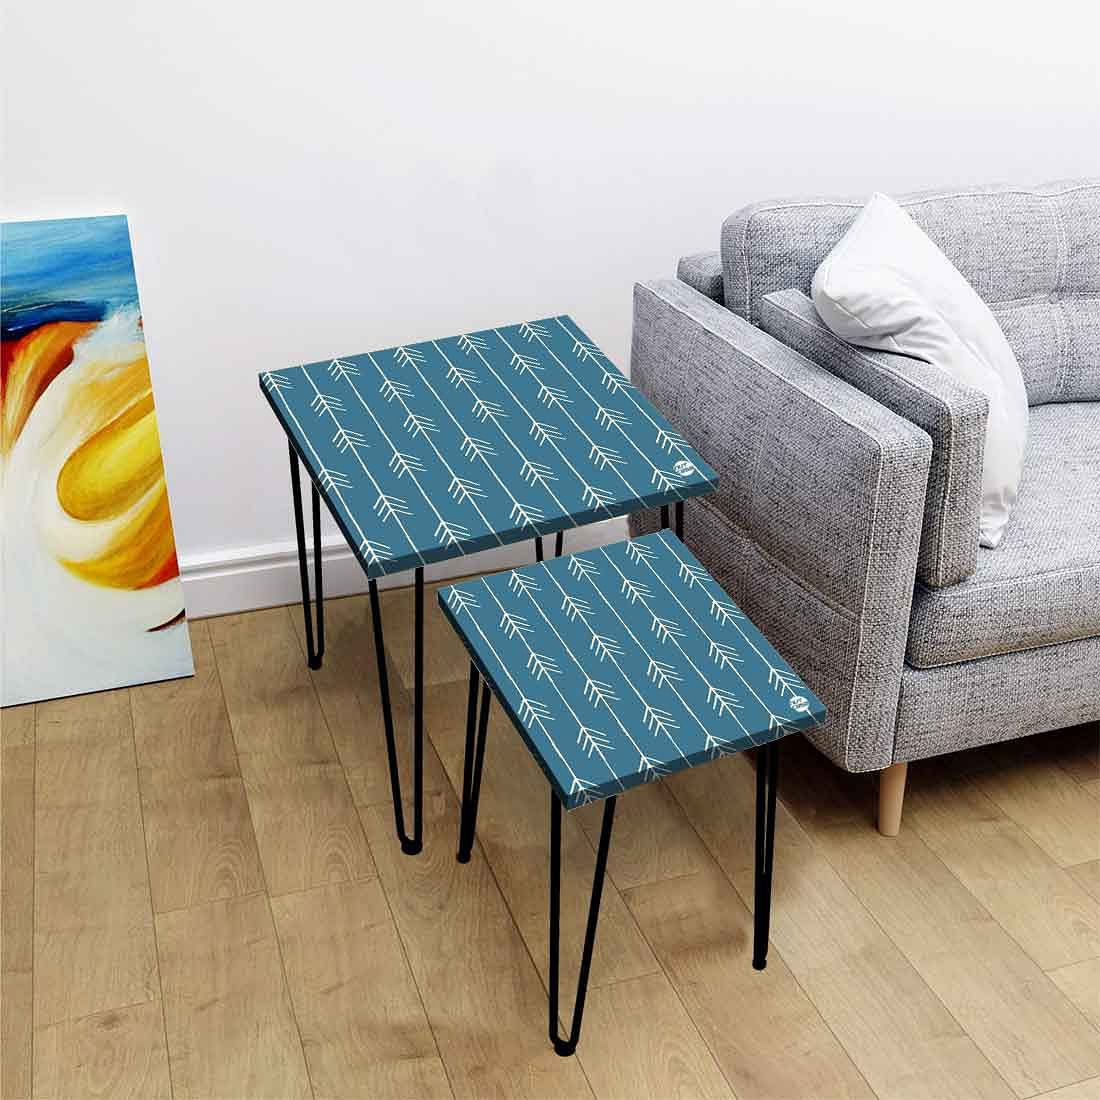 Square Nesting Coffee Tables Set Of 2 for Home and Office - Blue Arrow End Nutcase